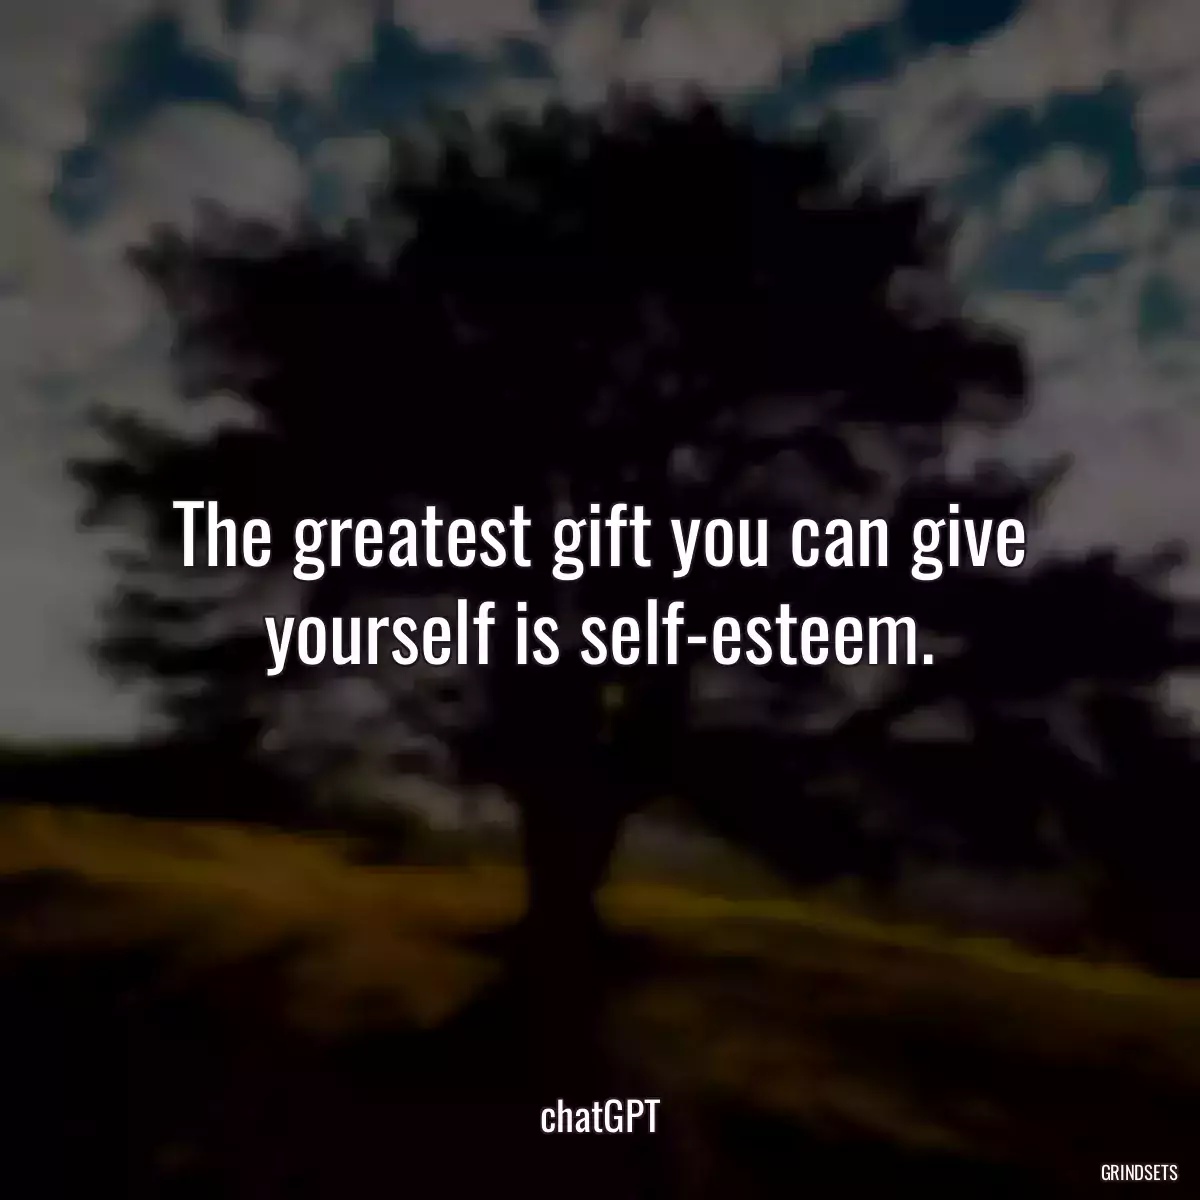 The greatest gift you can give yourself is self-esteem.